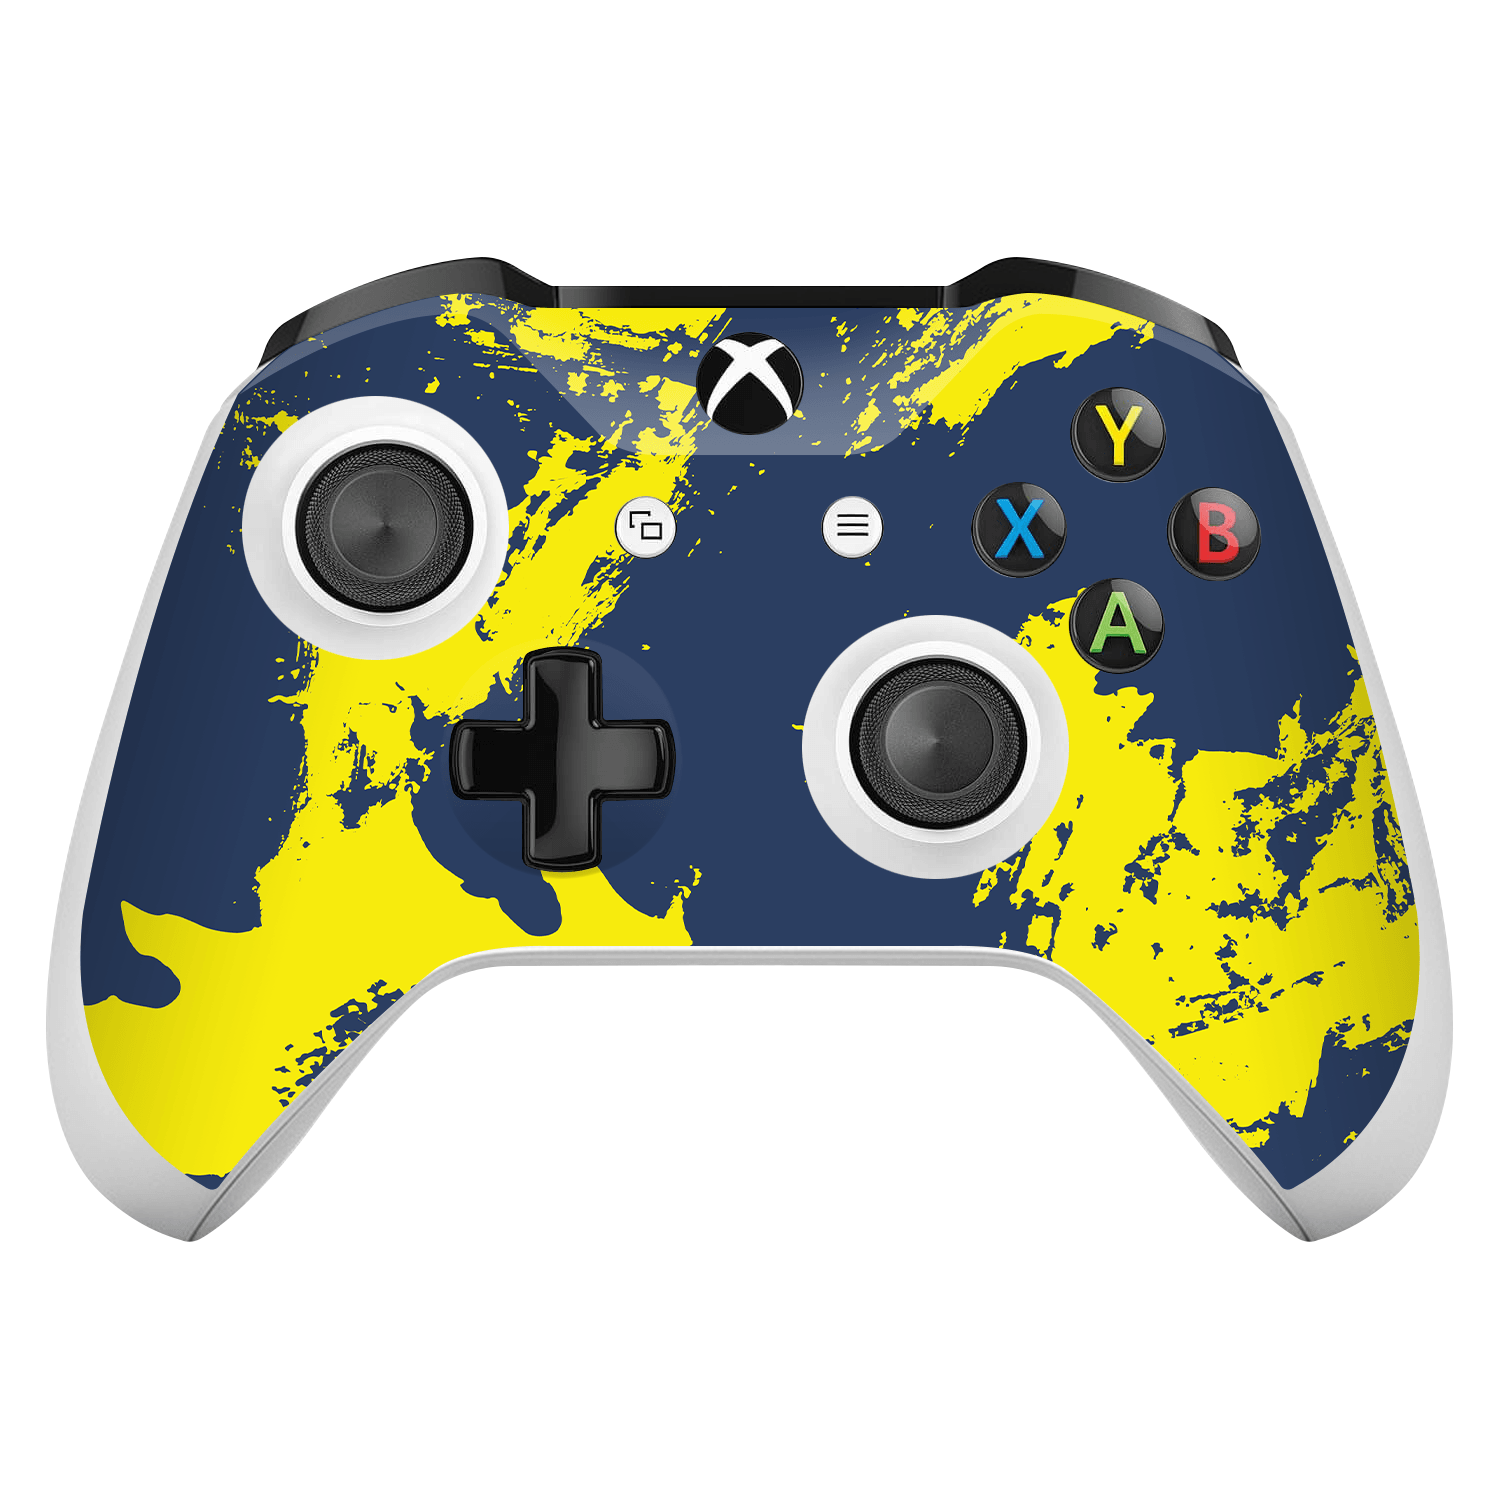 Xbox One X / S Controller Skin Yellow Navy Blue